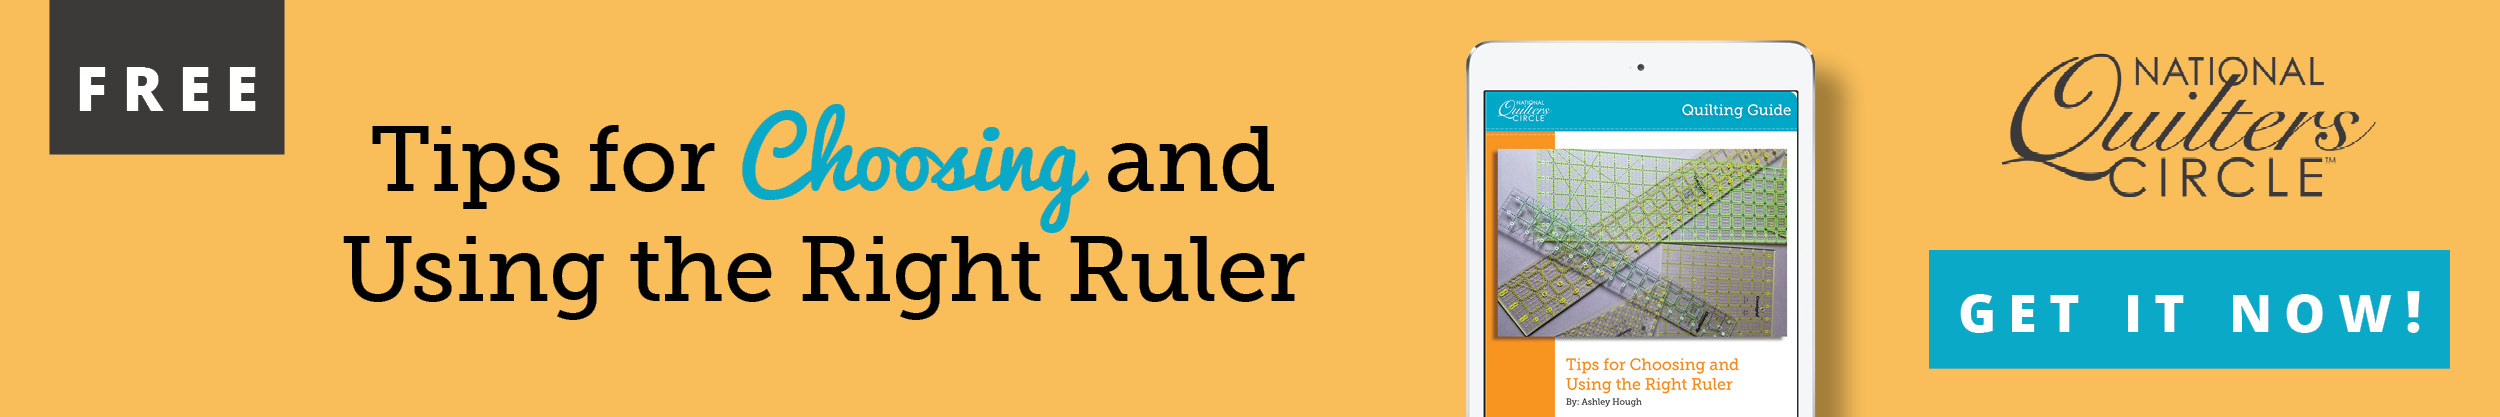 Choosing and using the right ruler banner